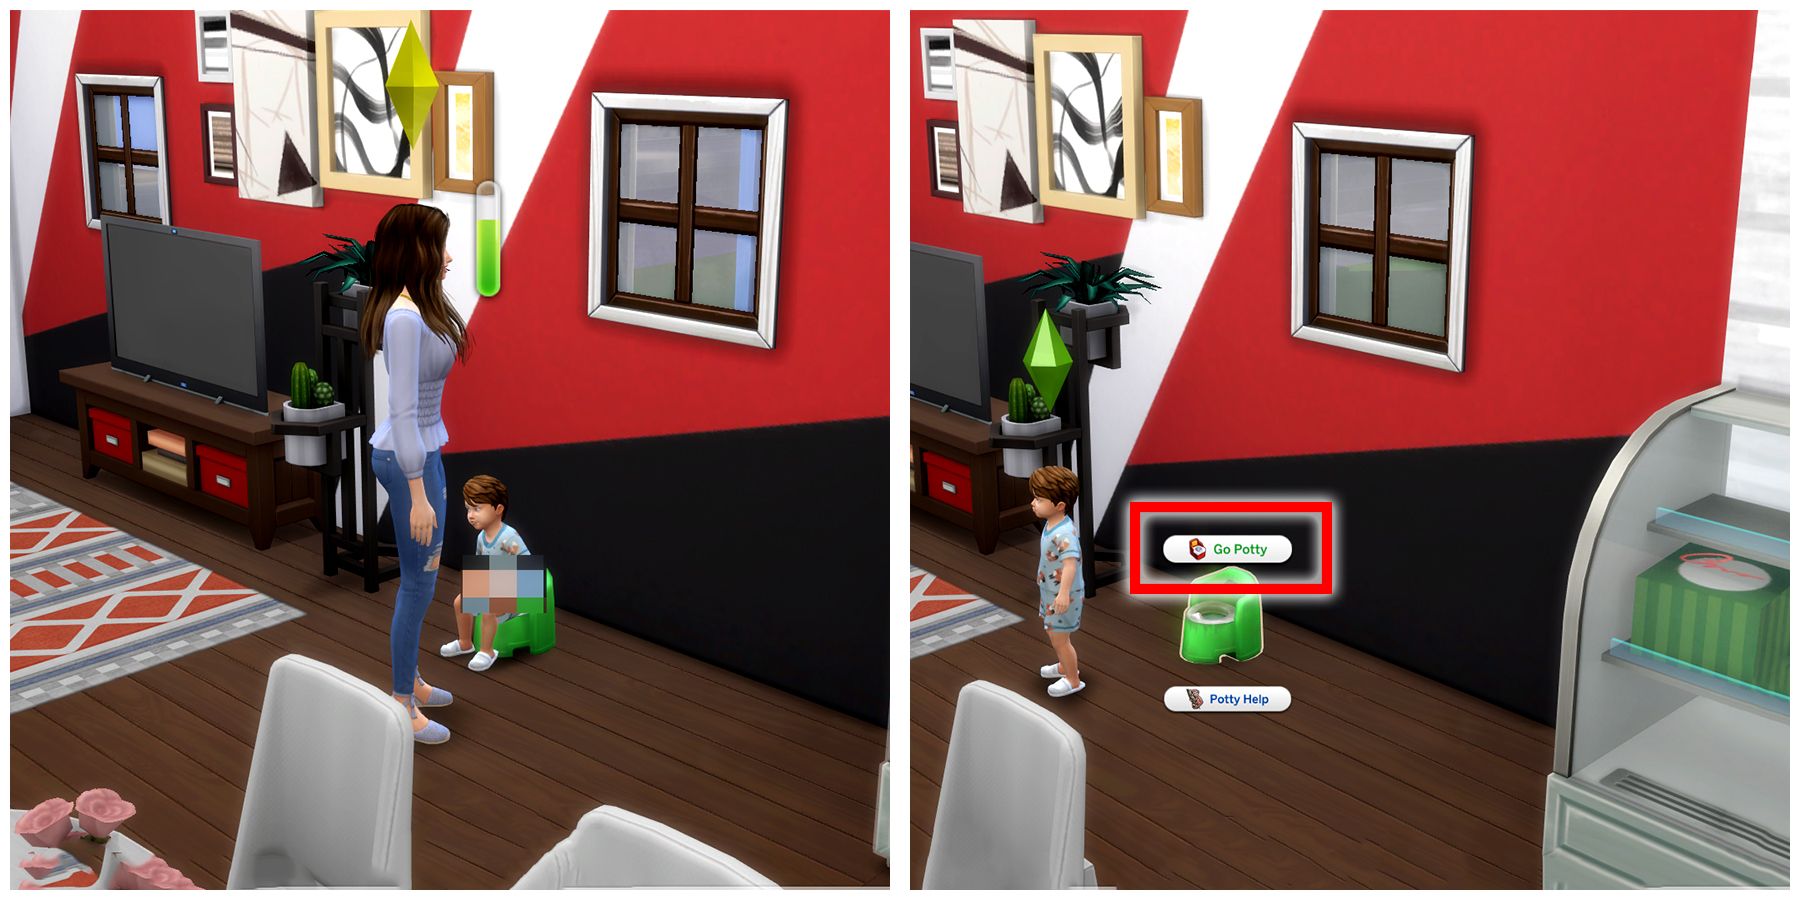 go potty option in the sims 4